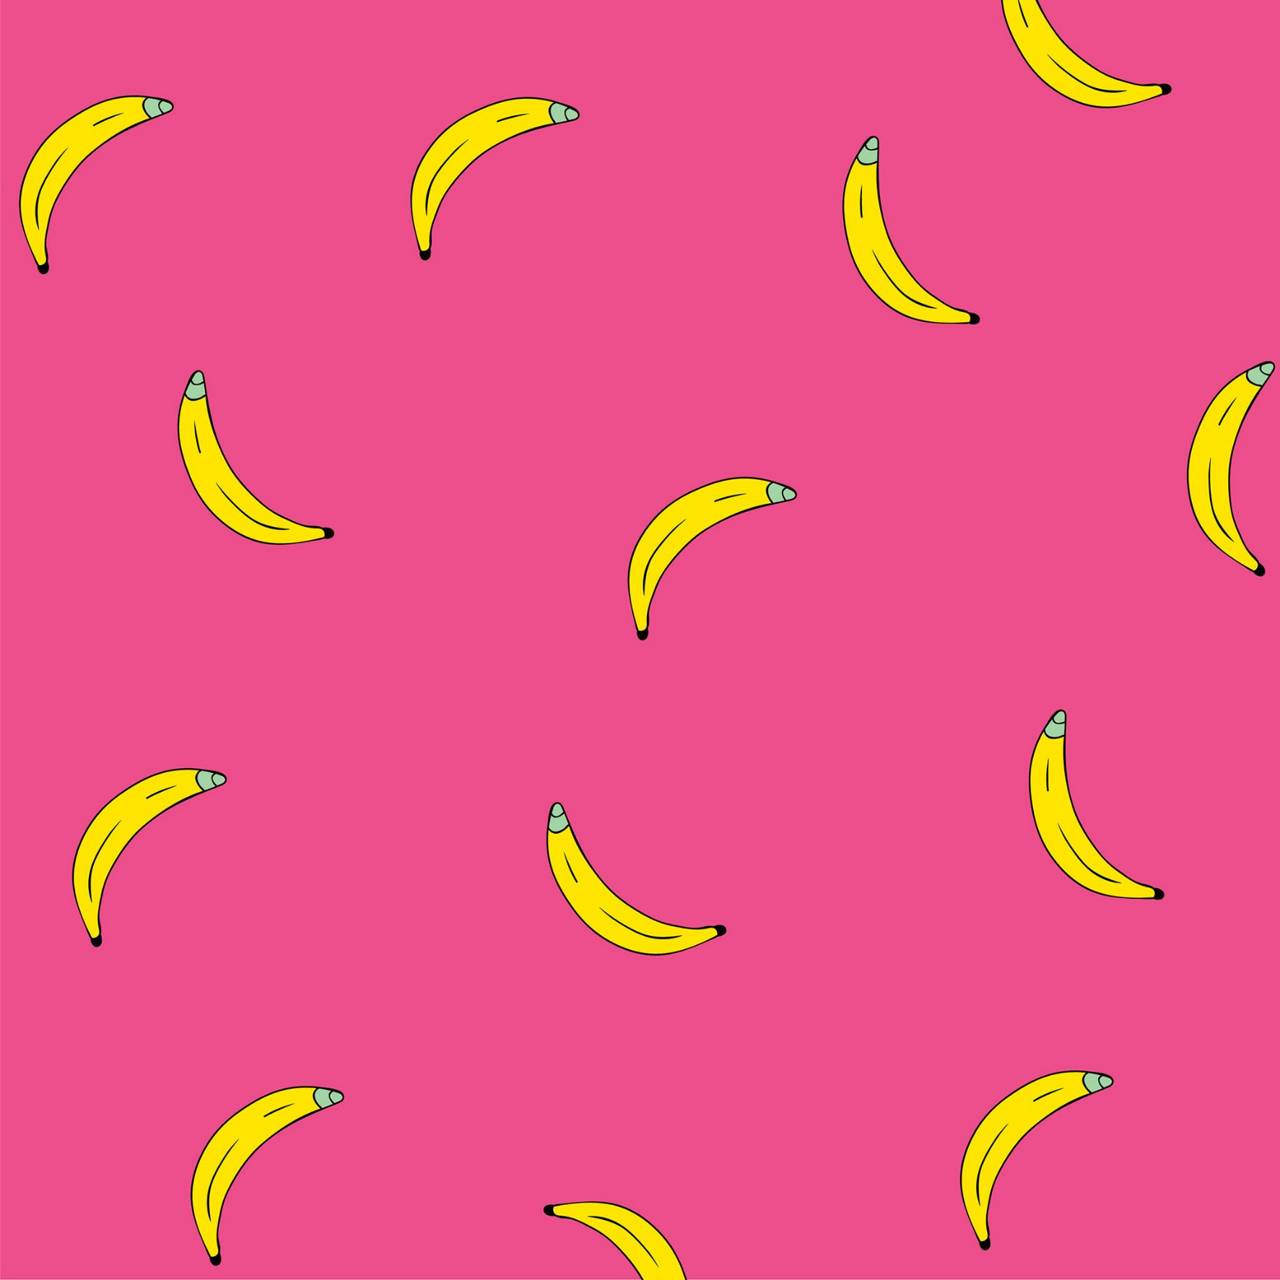 Download free banana wallpaper for your mobile phone